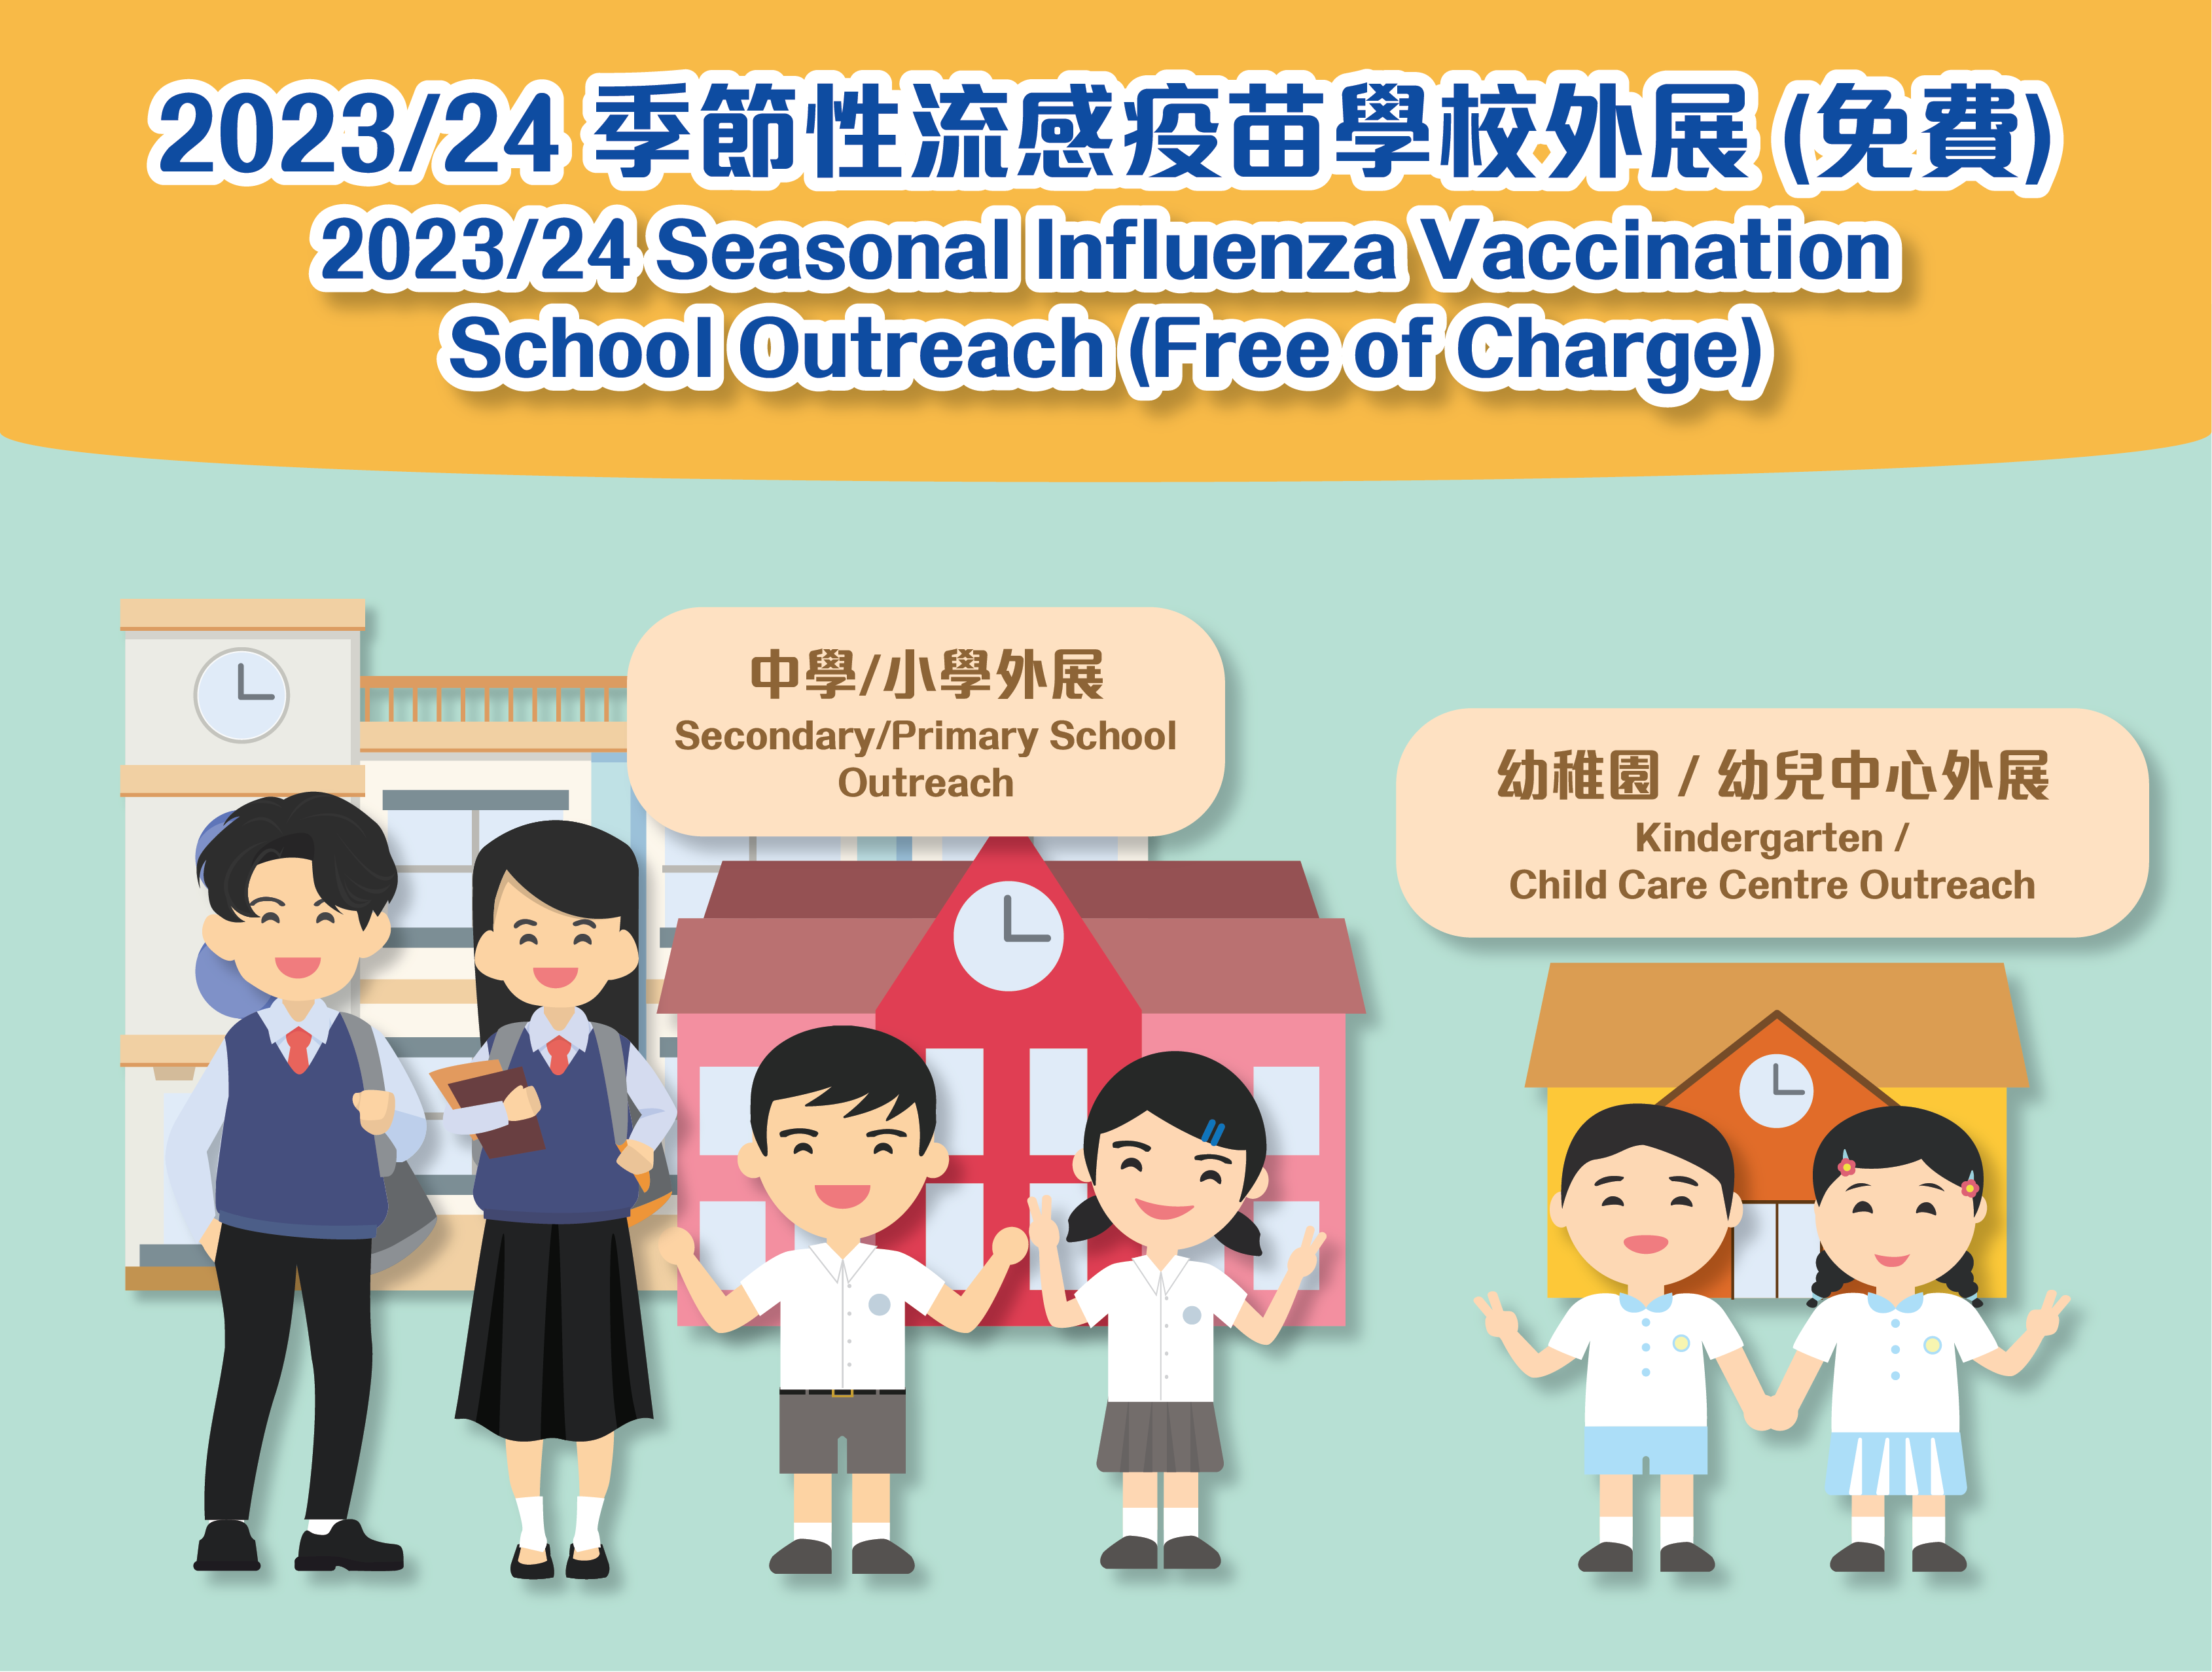 Seasonal Influenza Vaccination (SIV) School Outreach (Free of Charge) 2023/24